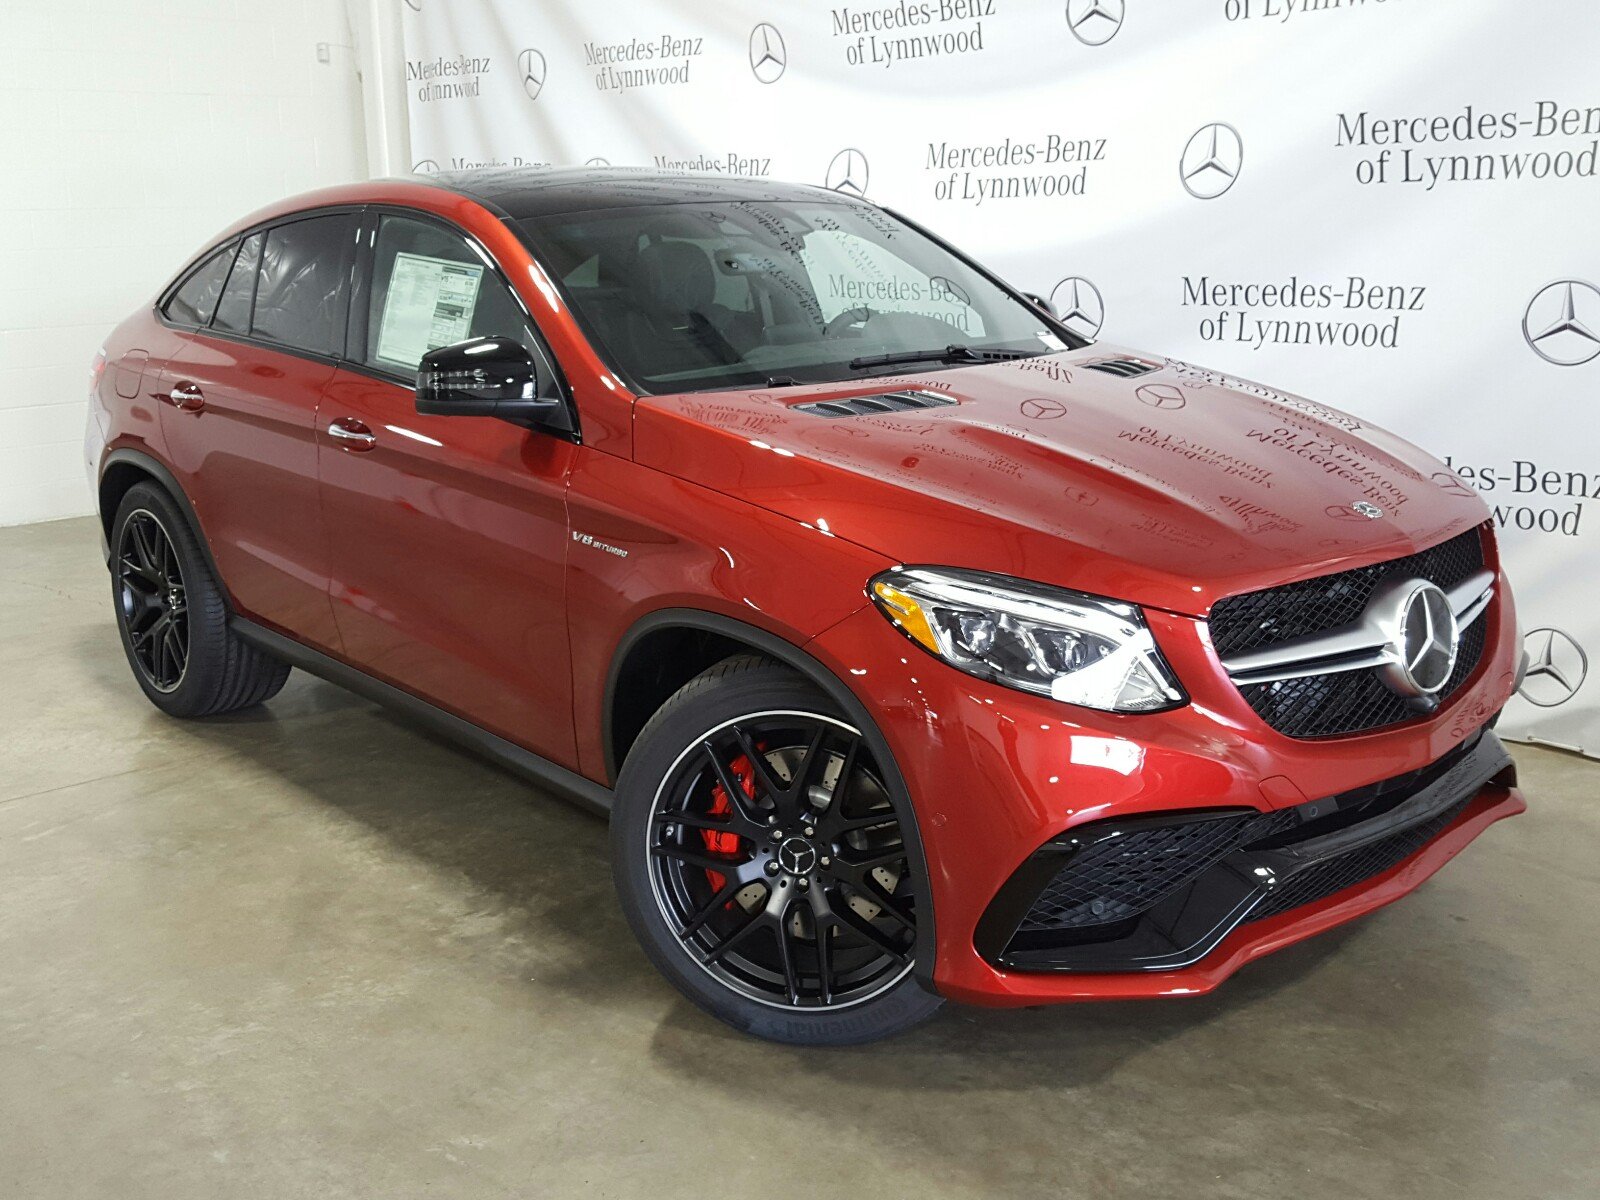 New 2019 Mercedes Benz Amg Gle 63 S 4matic Coupe - new model of mercedes benz gle